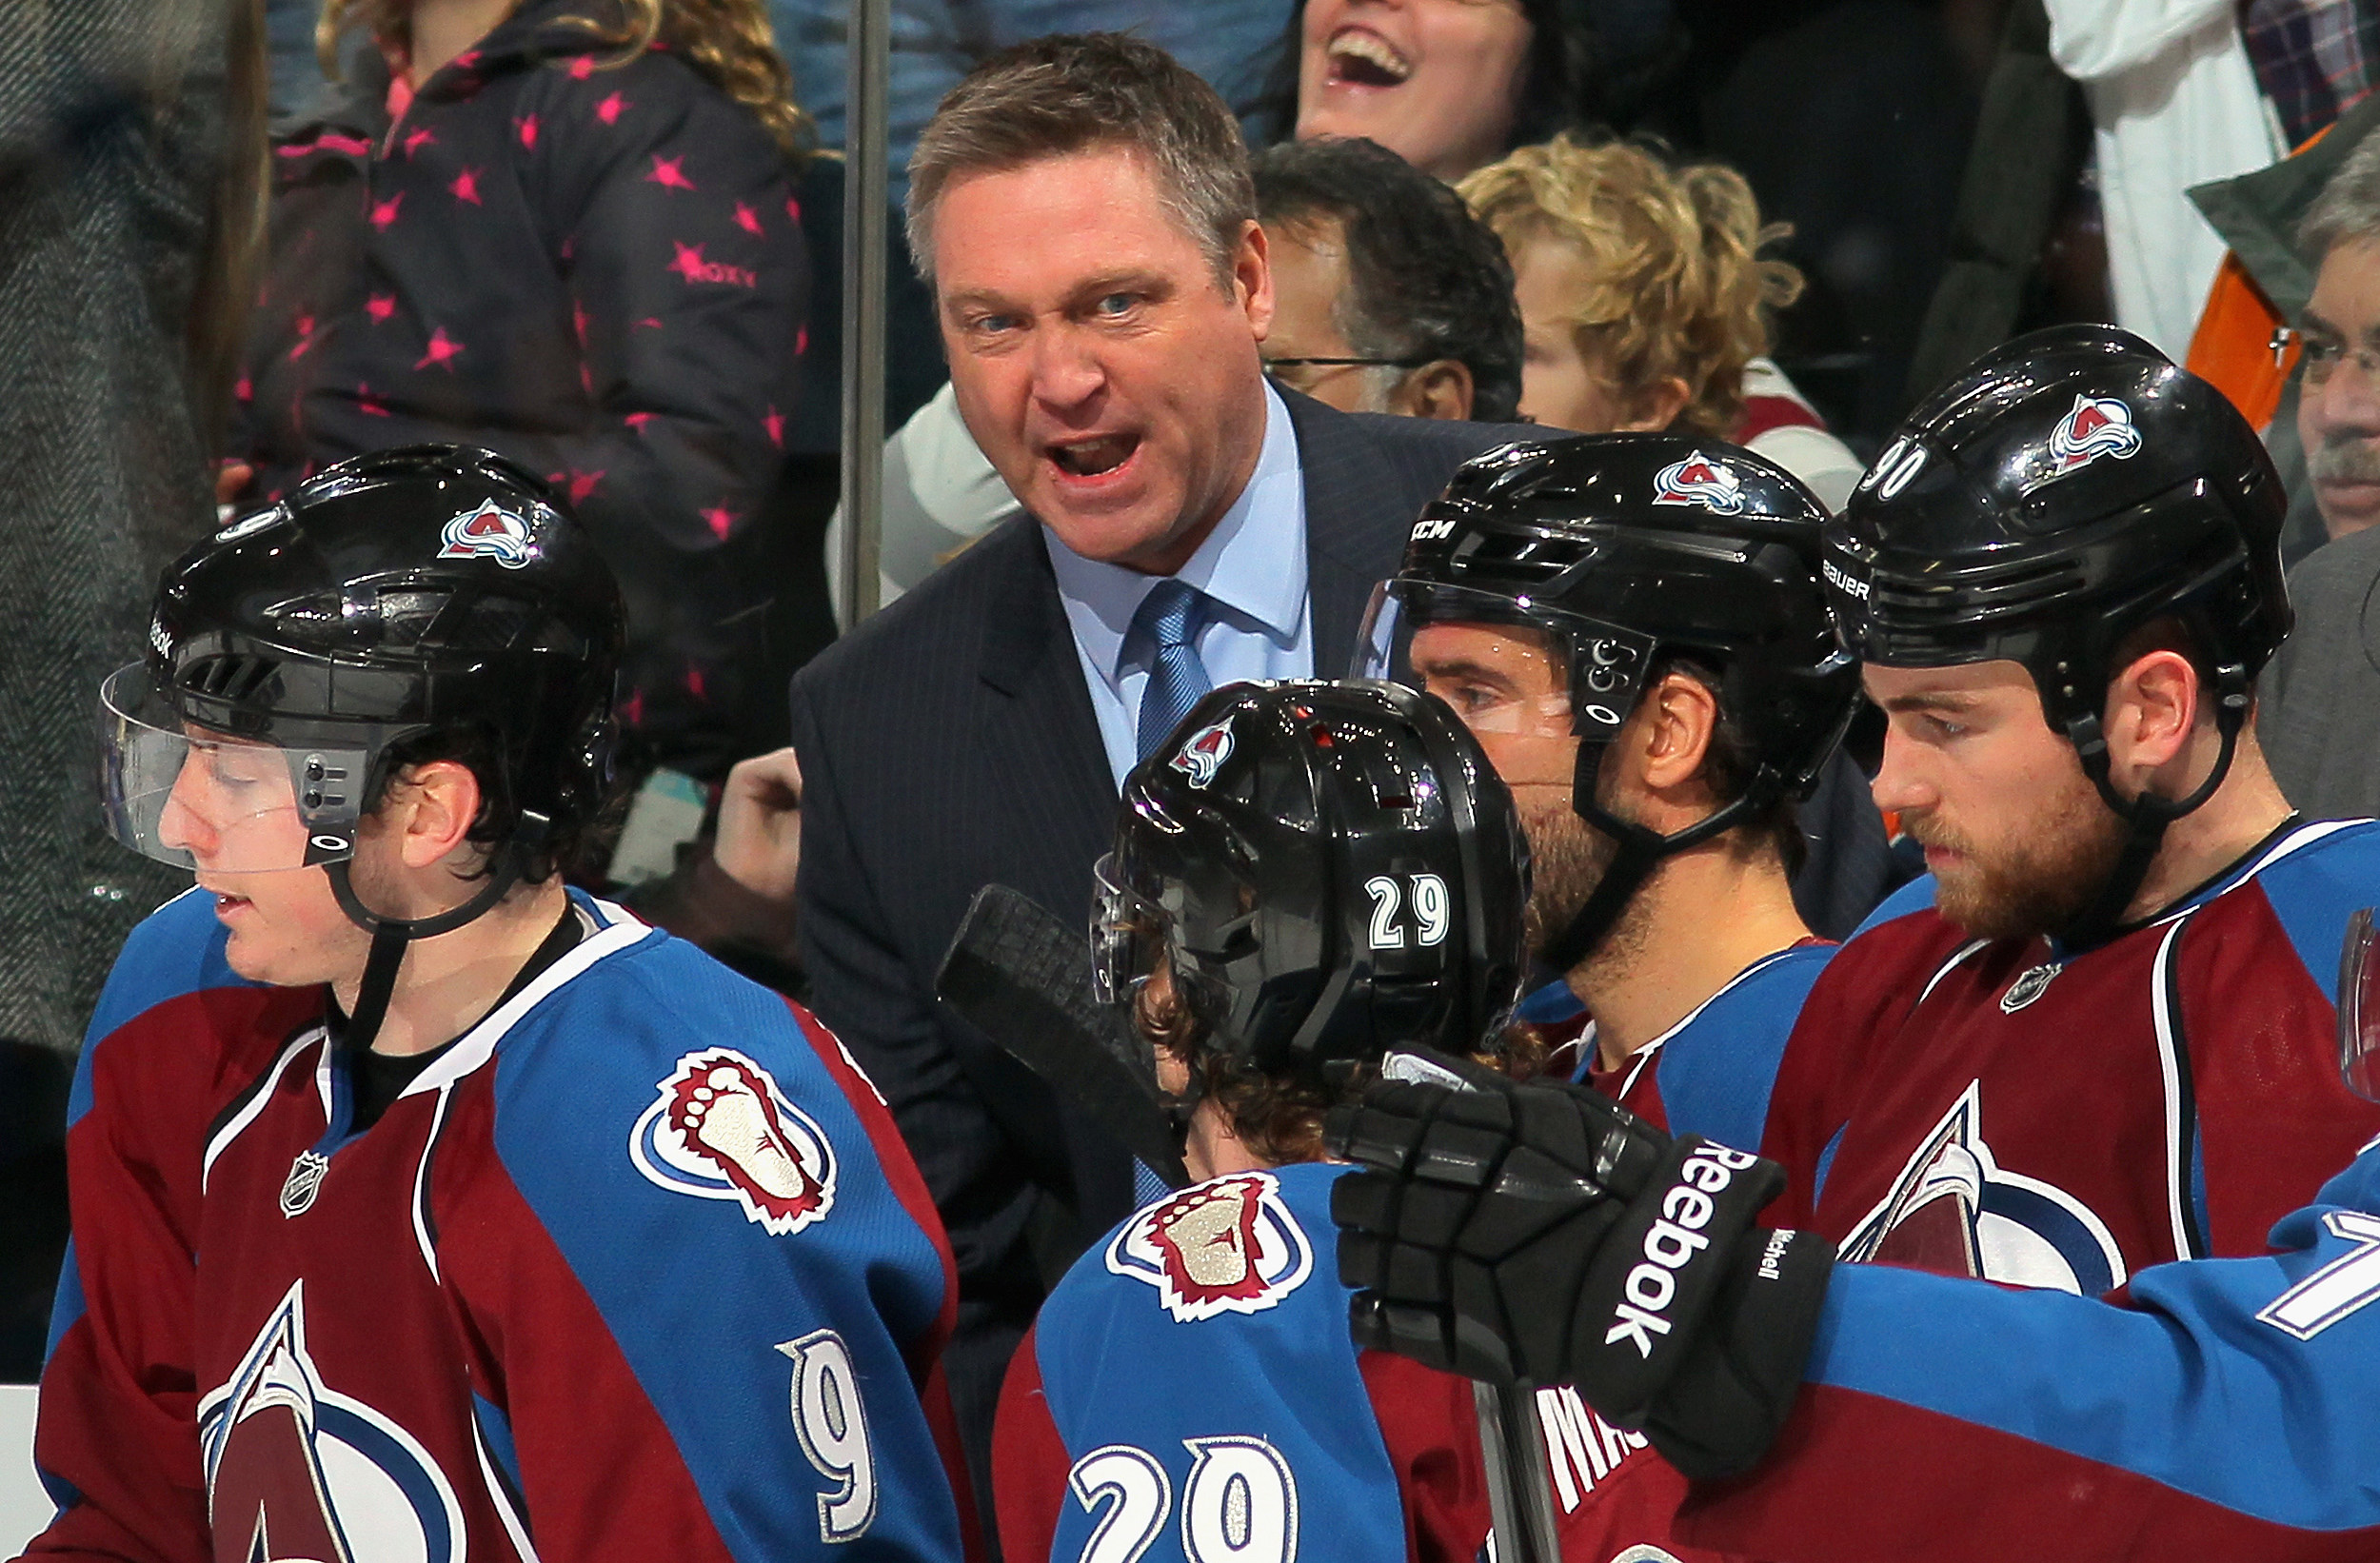 And Coach of the Year in the NHL…..Patrick Roy